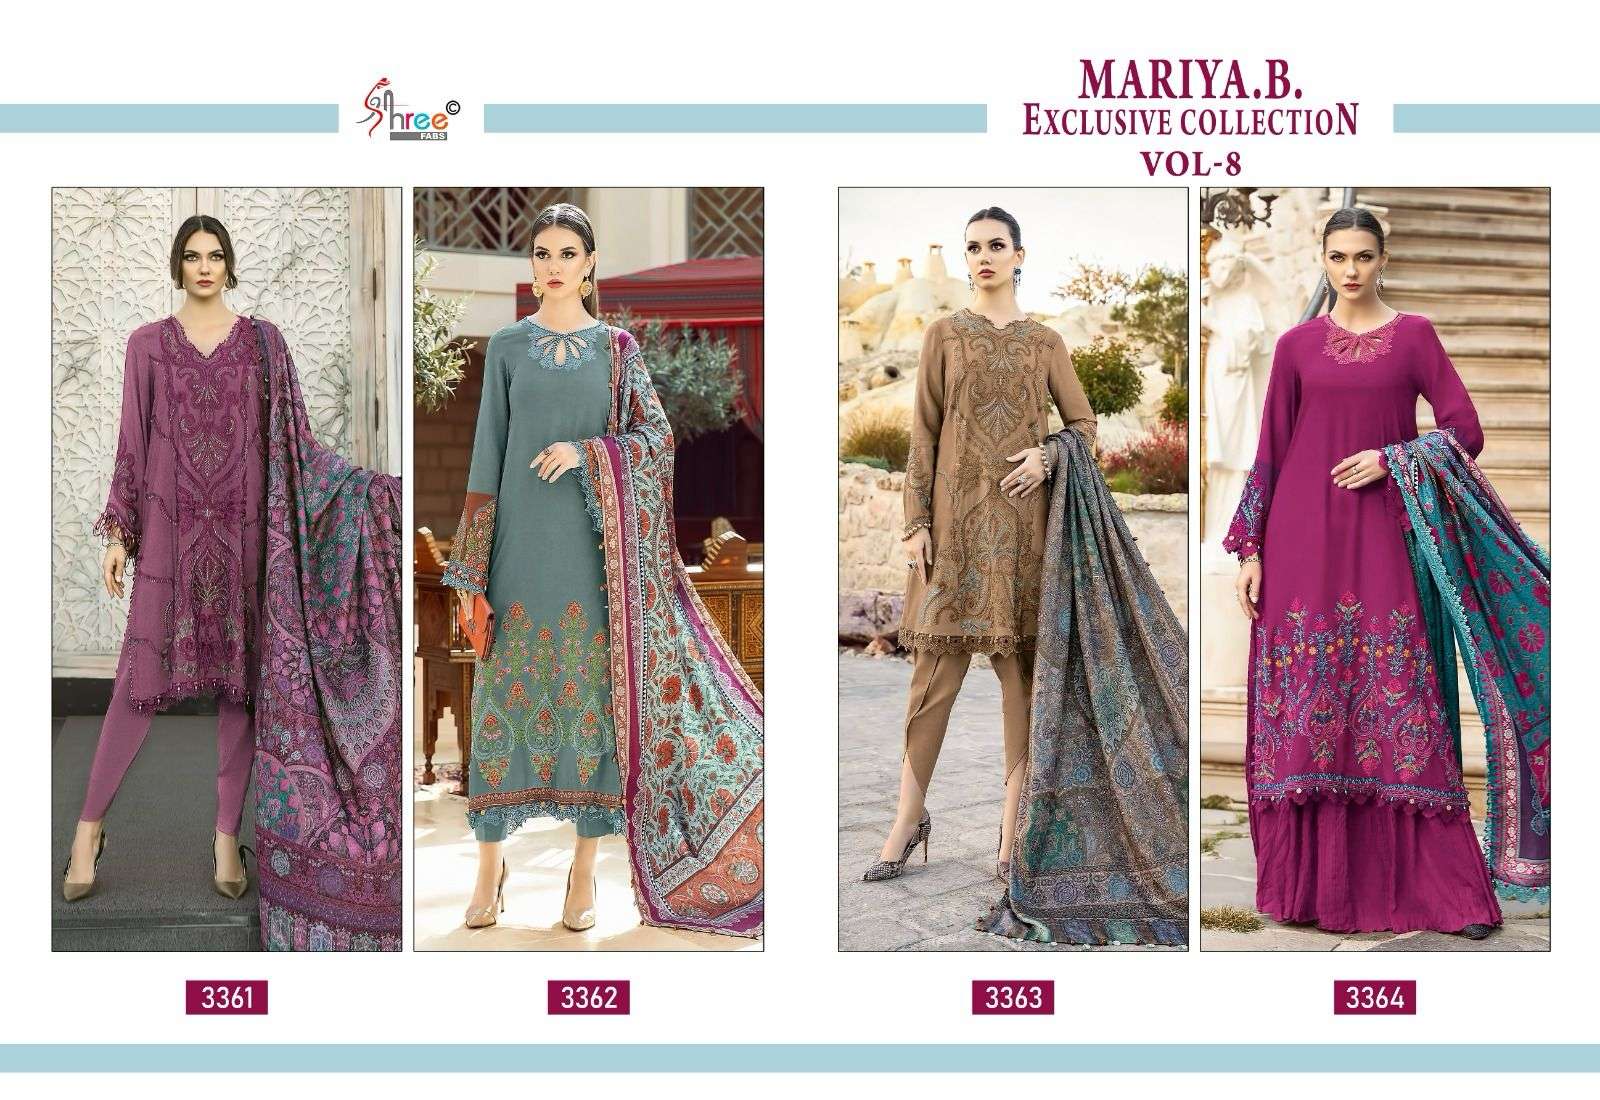 SHREE FABS MARIA B EXCLUSIVE COLLECTION VOL 8 